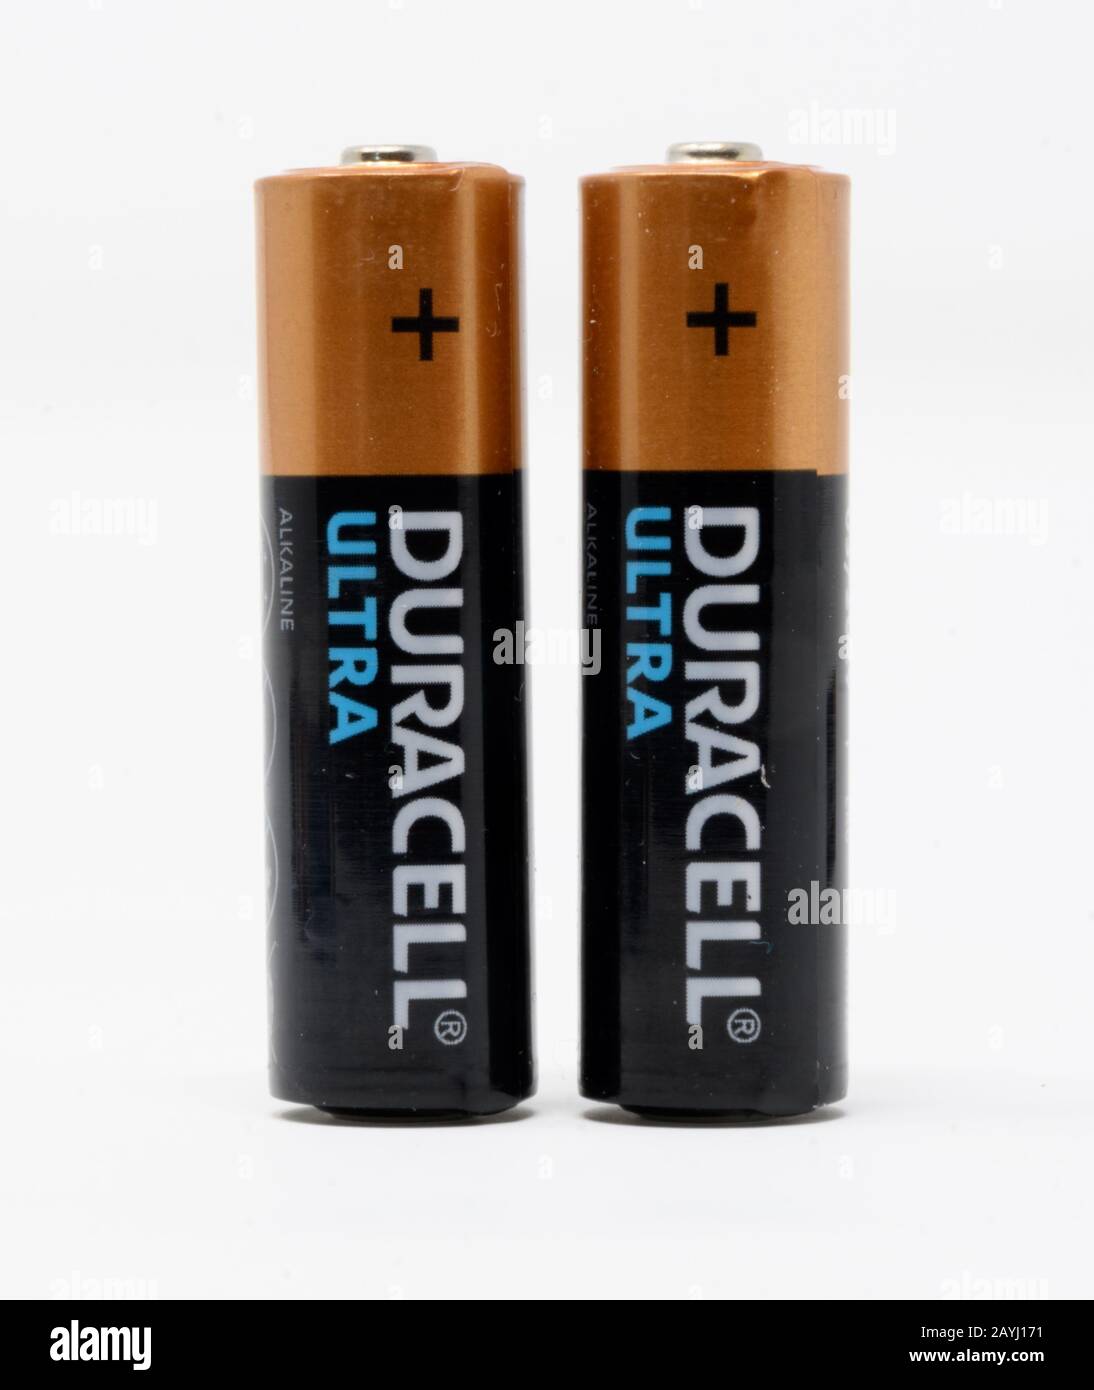 Reading, United Kingdom - December 29 2019: Two Duracell Ultra AA batteries  Stock Photo - Alamy